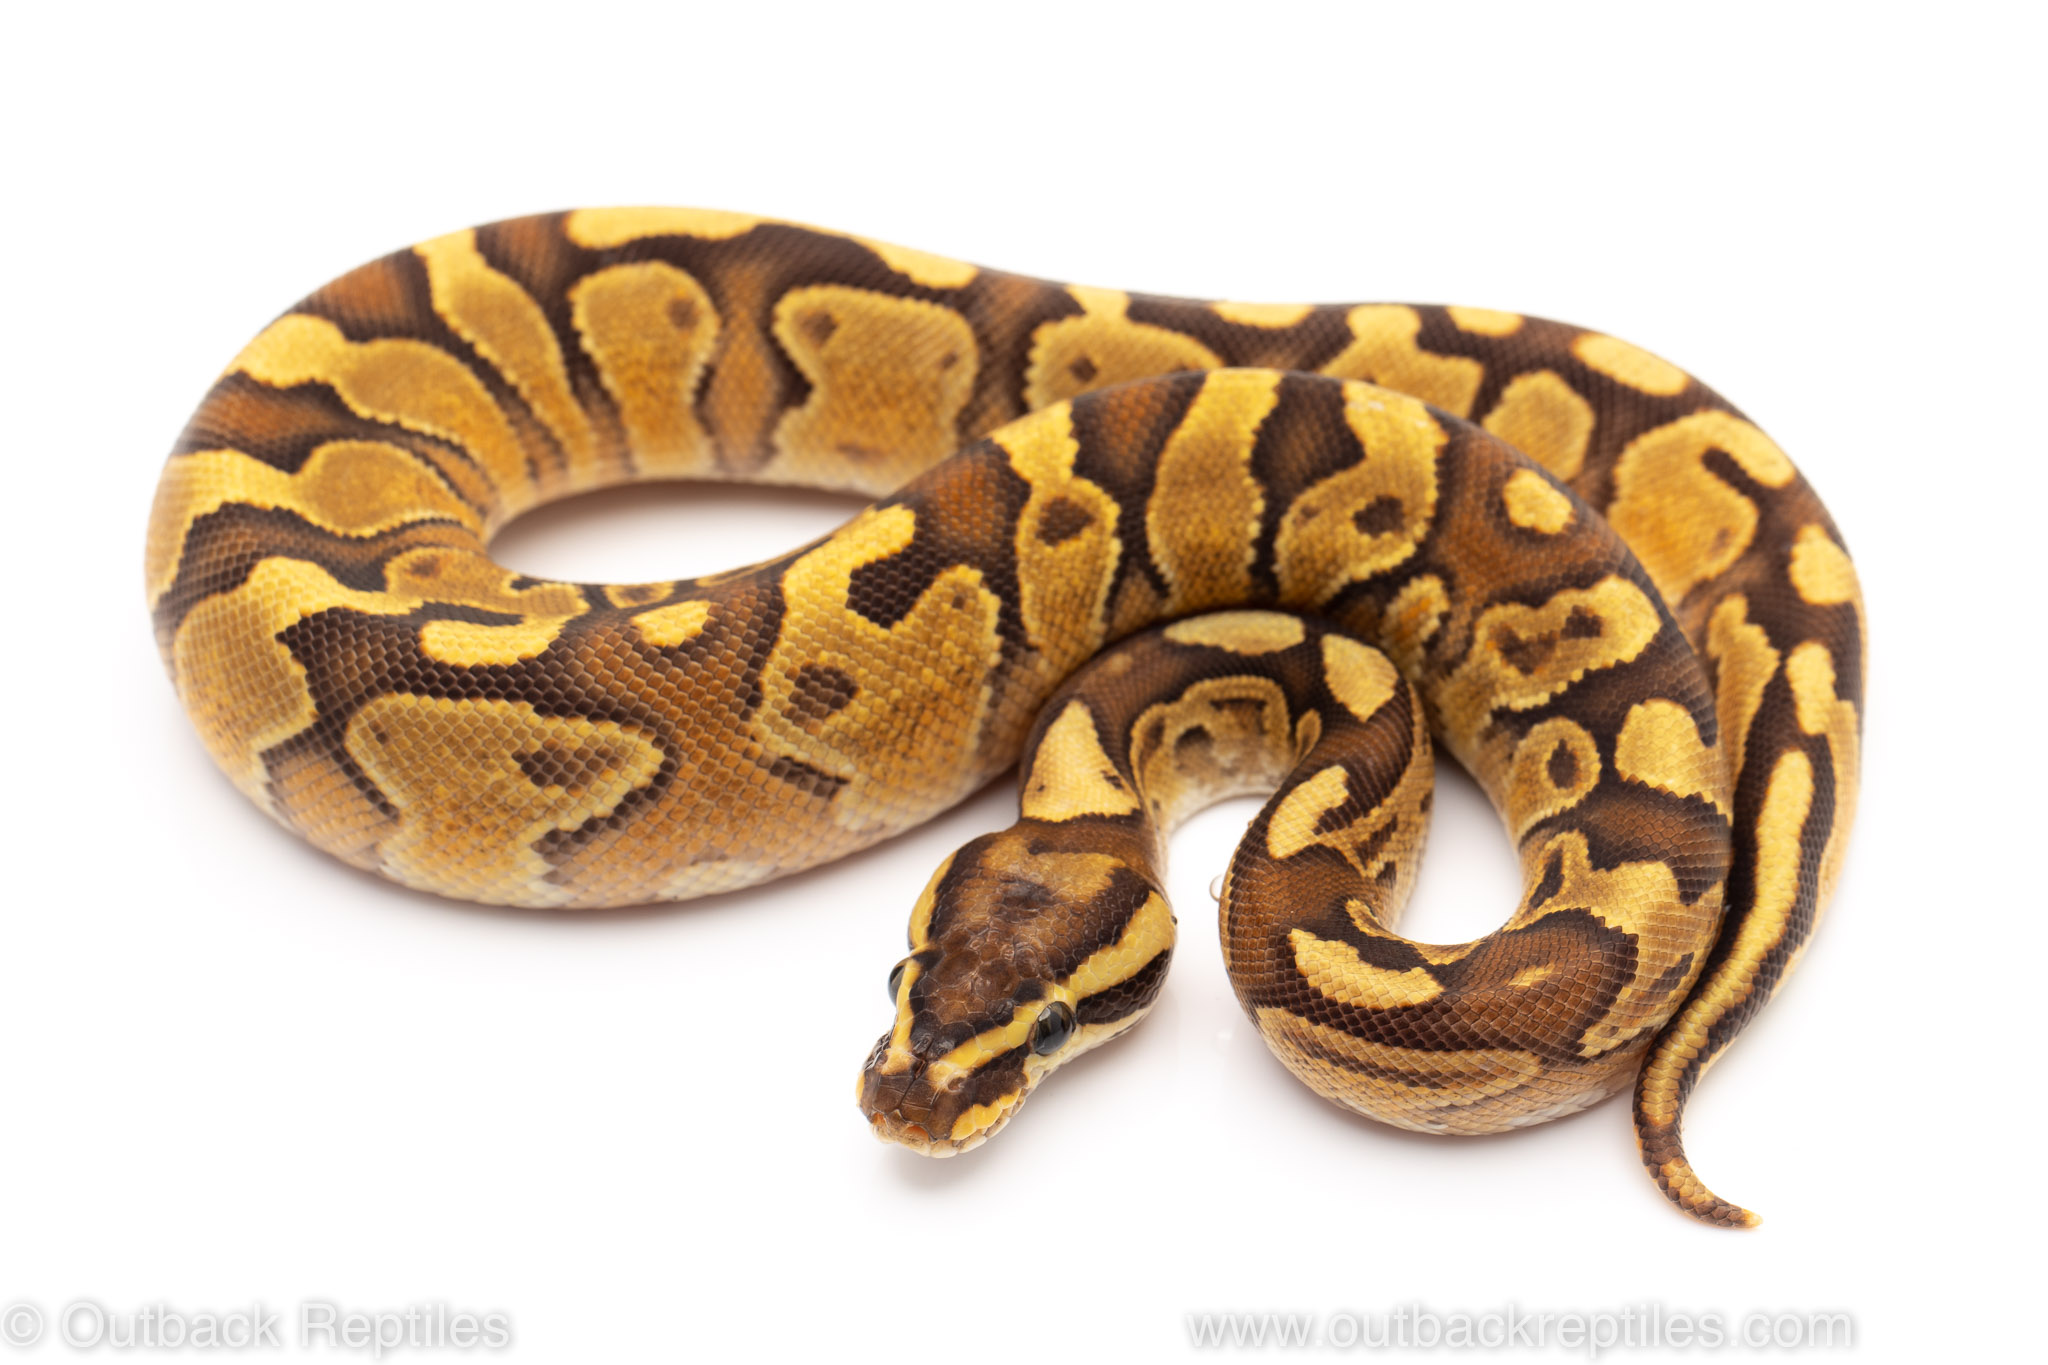 fire enchi special ball python for sale